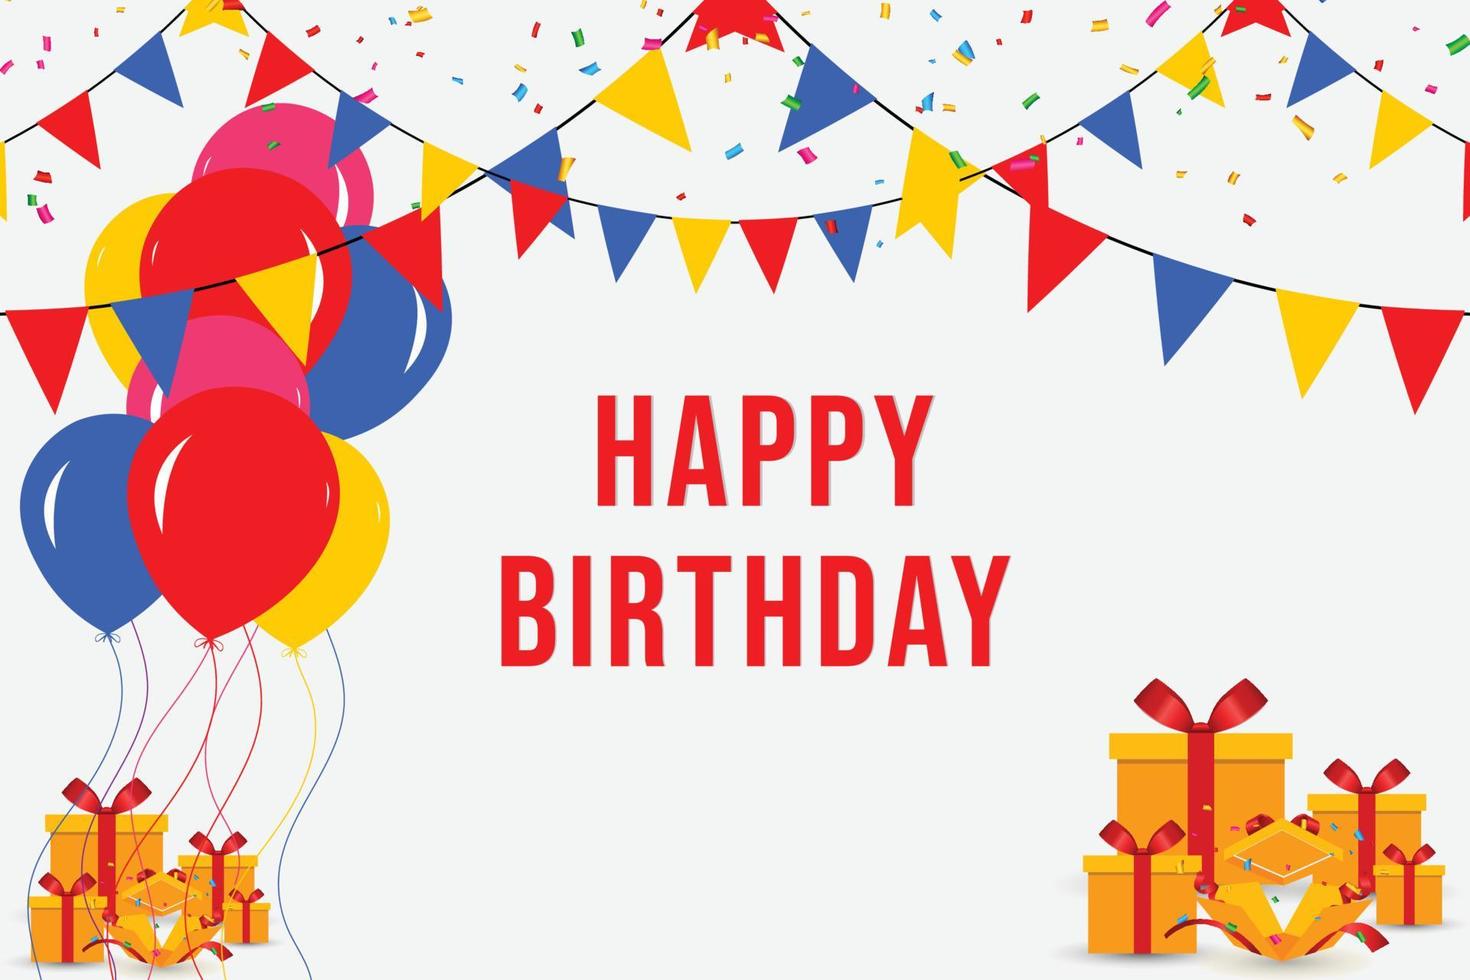 Happy Birthday colorful banner design with balloons and gift box. vector